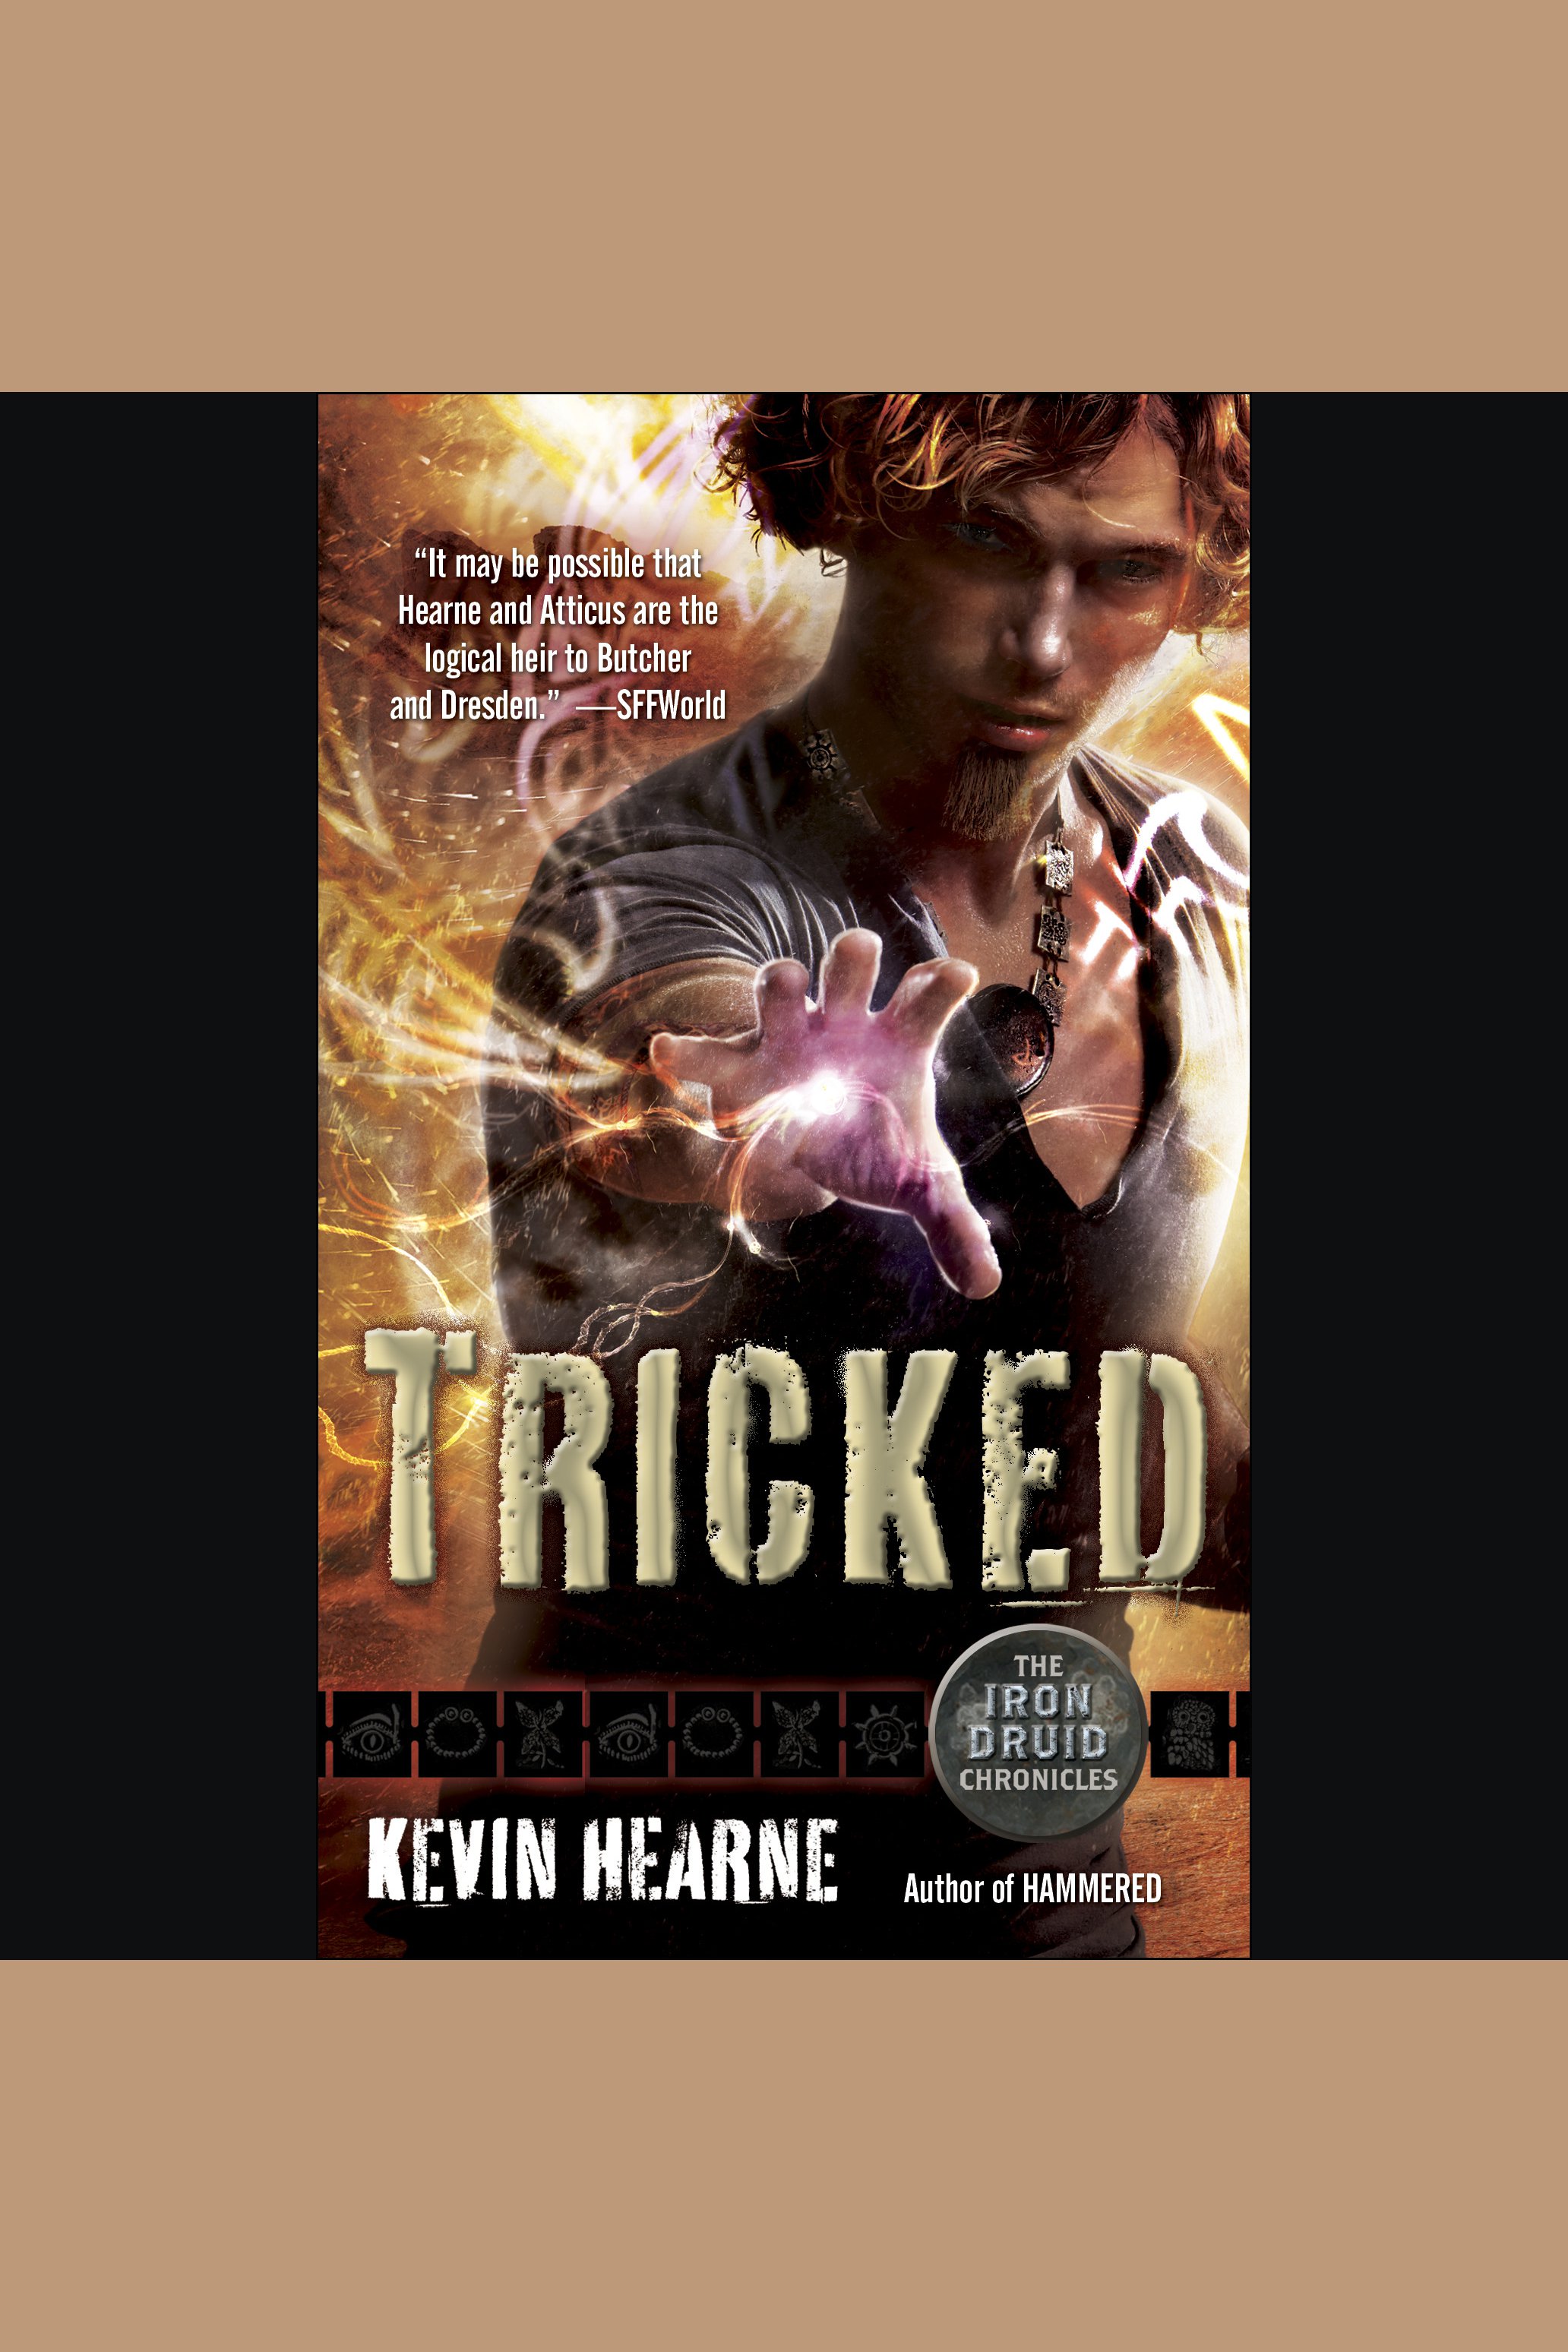 Tricked cover image